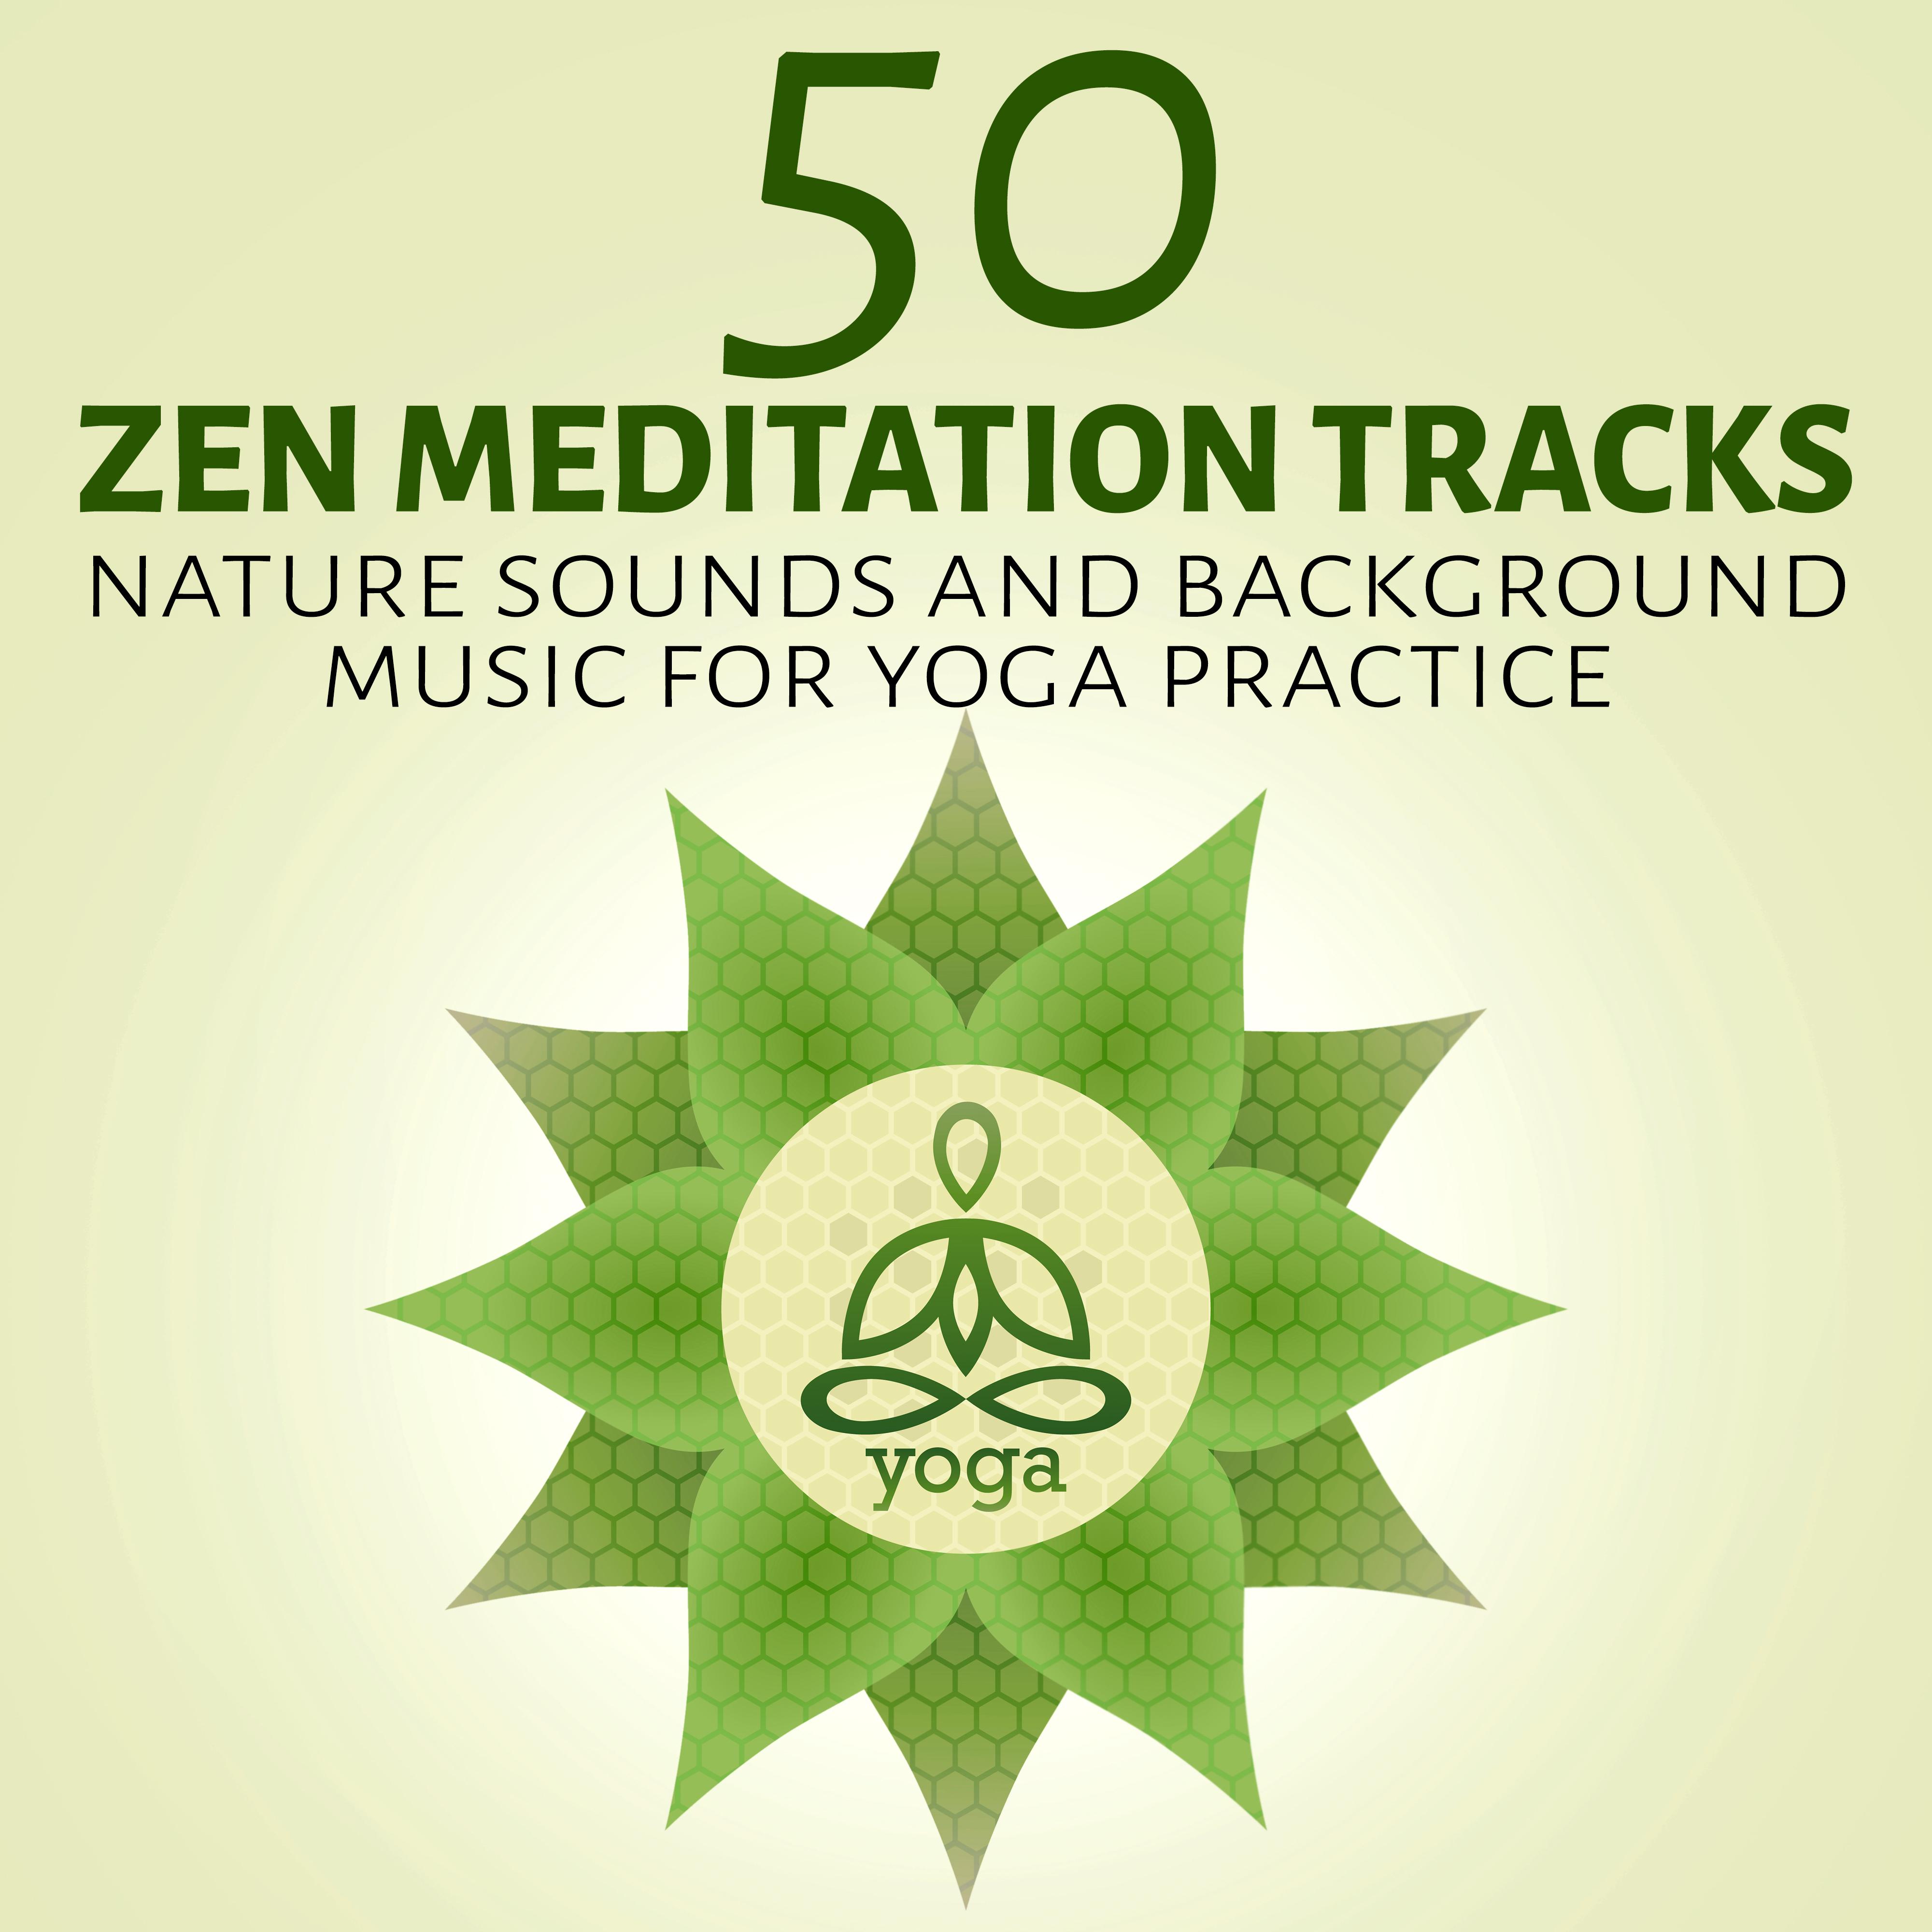 Nature Sounds and Background Music for Yoga Practice - 50 Zen Meditation Tracks and Amazing Peaceful Music for Yoga Classes and Relaxation